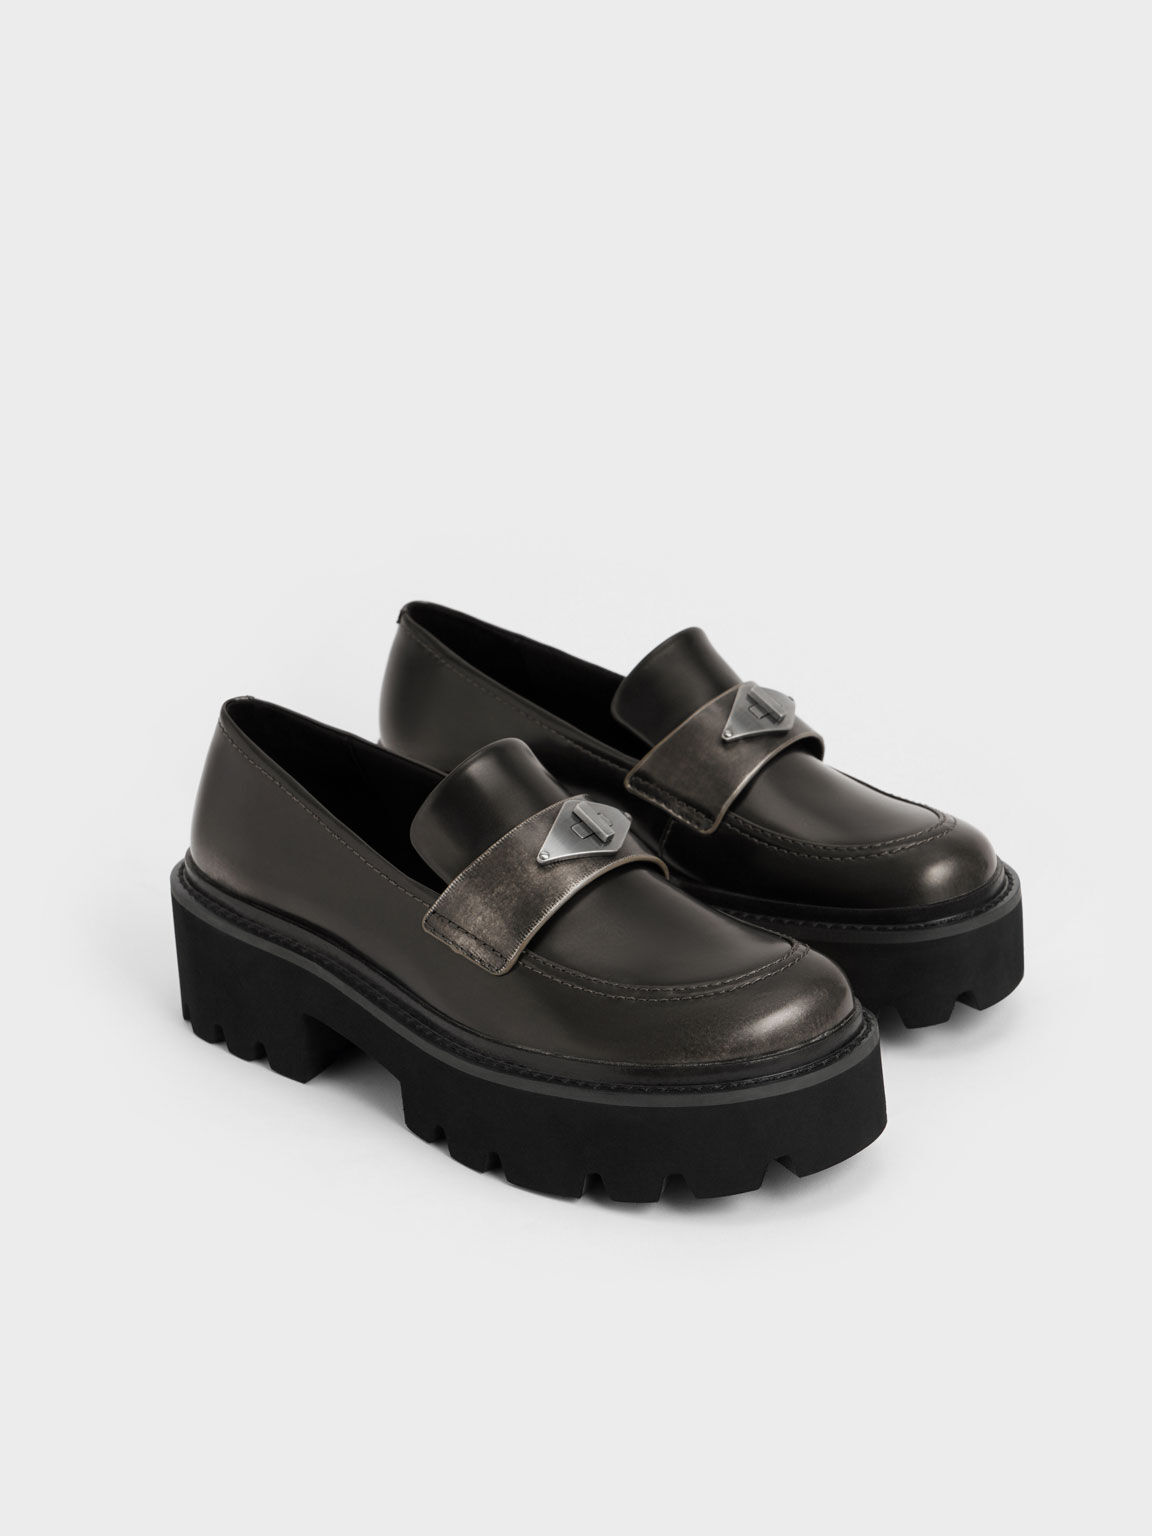 Metallic Accent Penny Loafers, Black Textured, hi-res